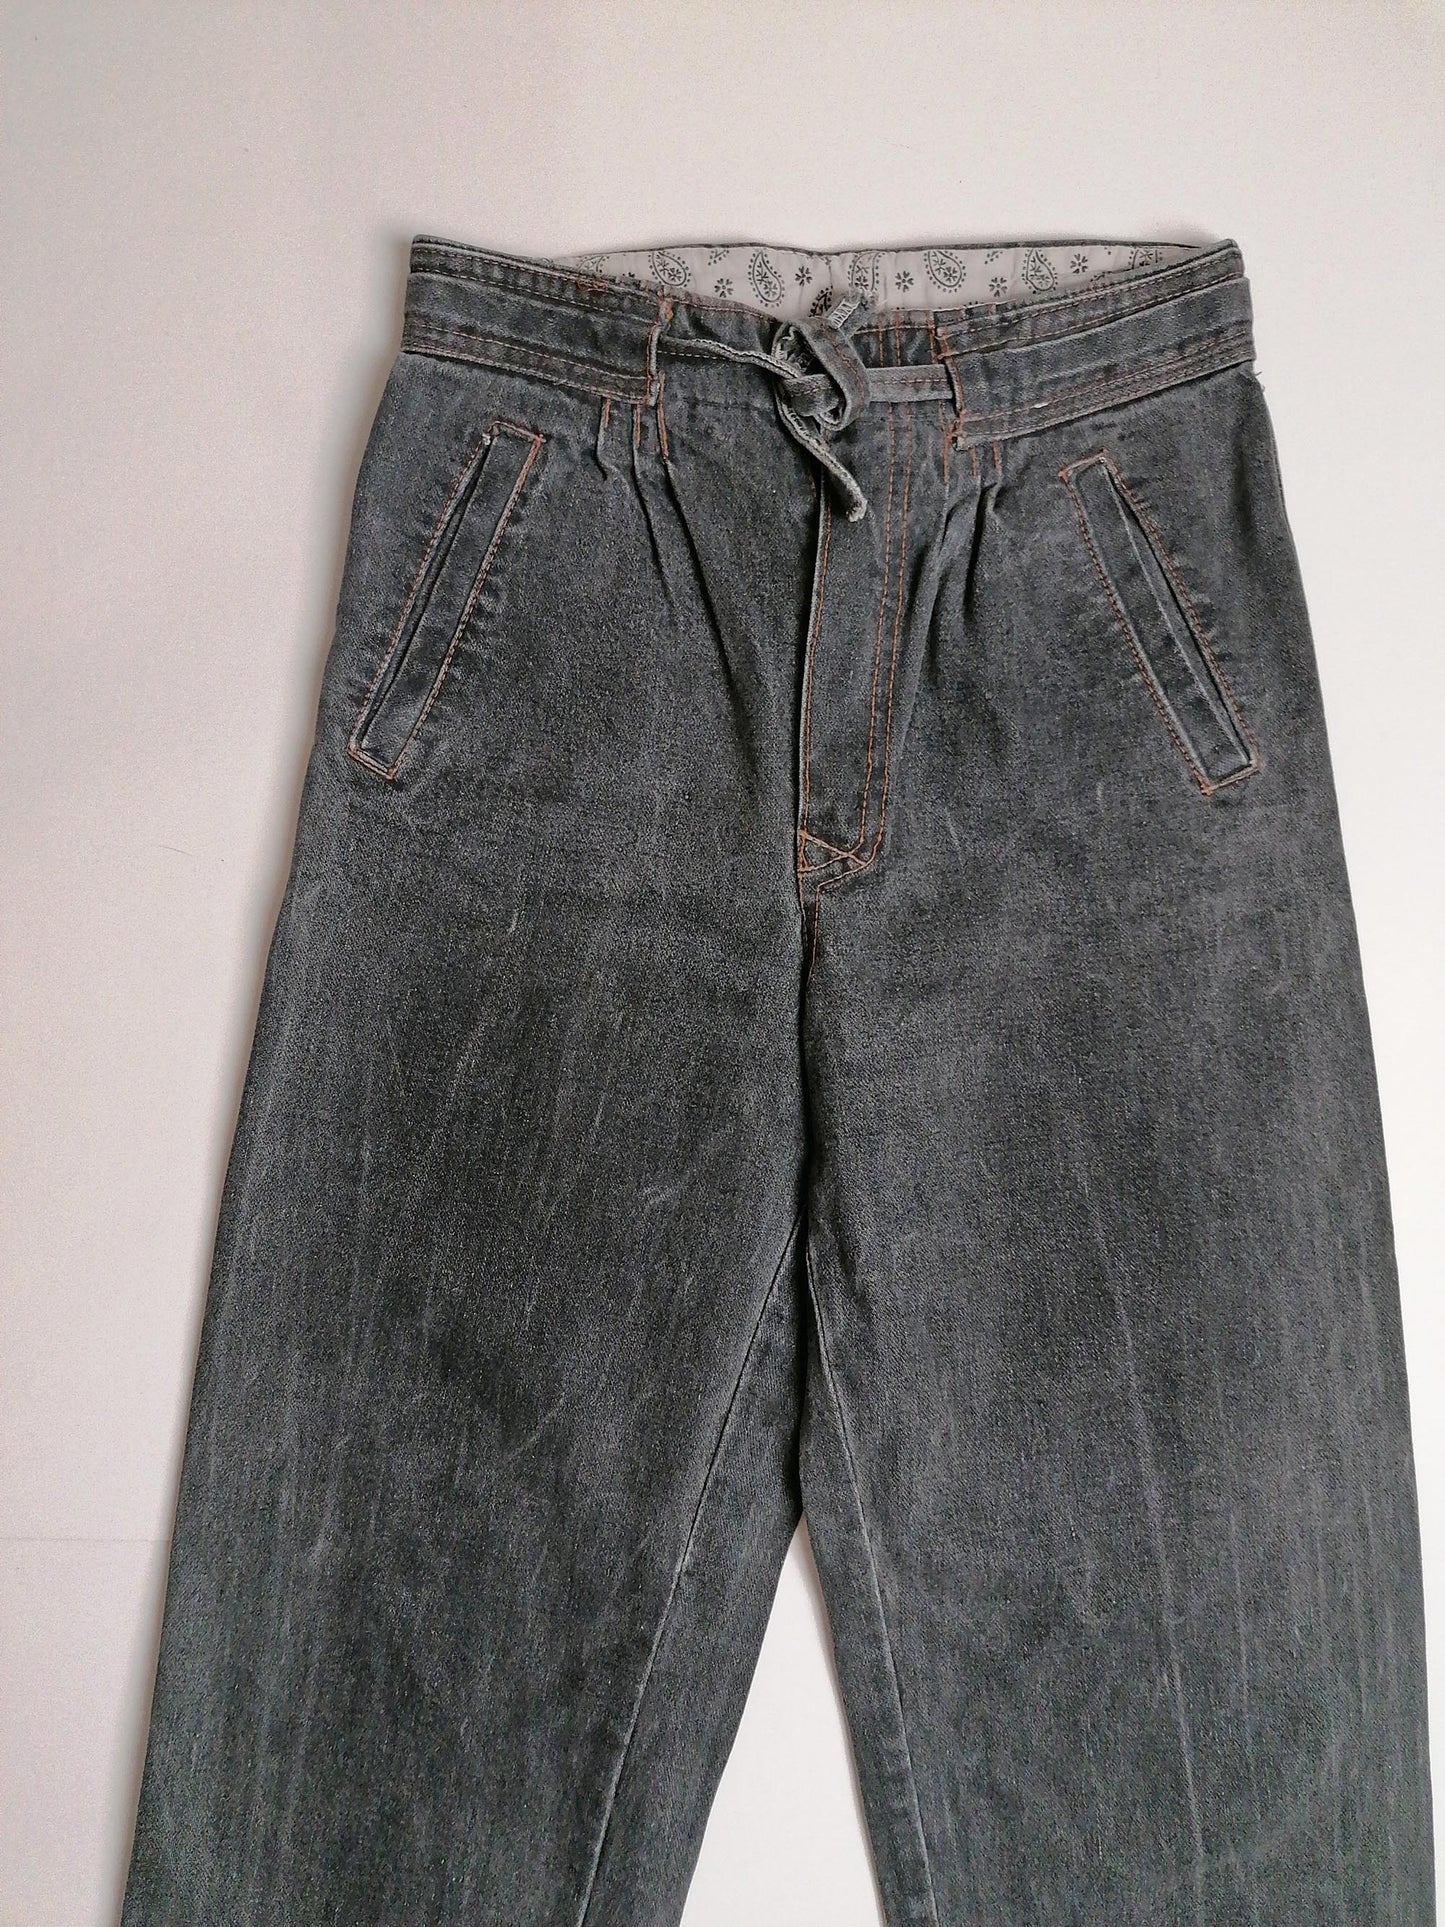 90's High Waist Jeans Charcoal - size XS